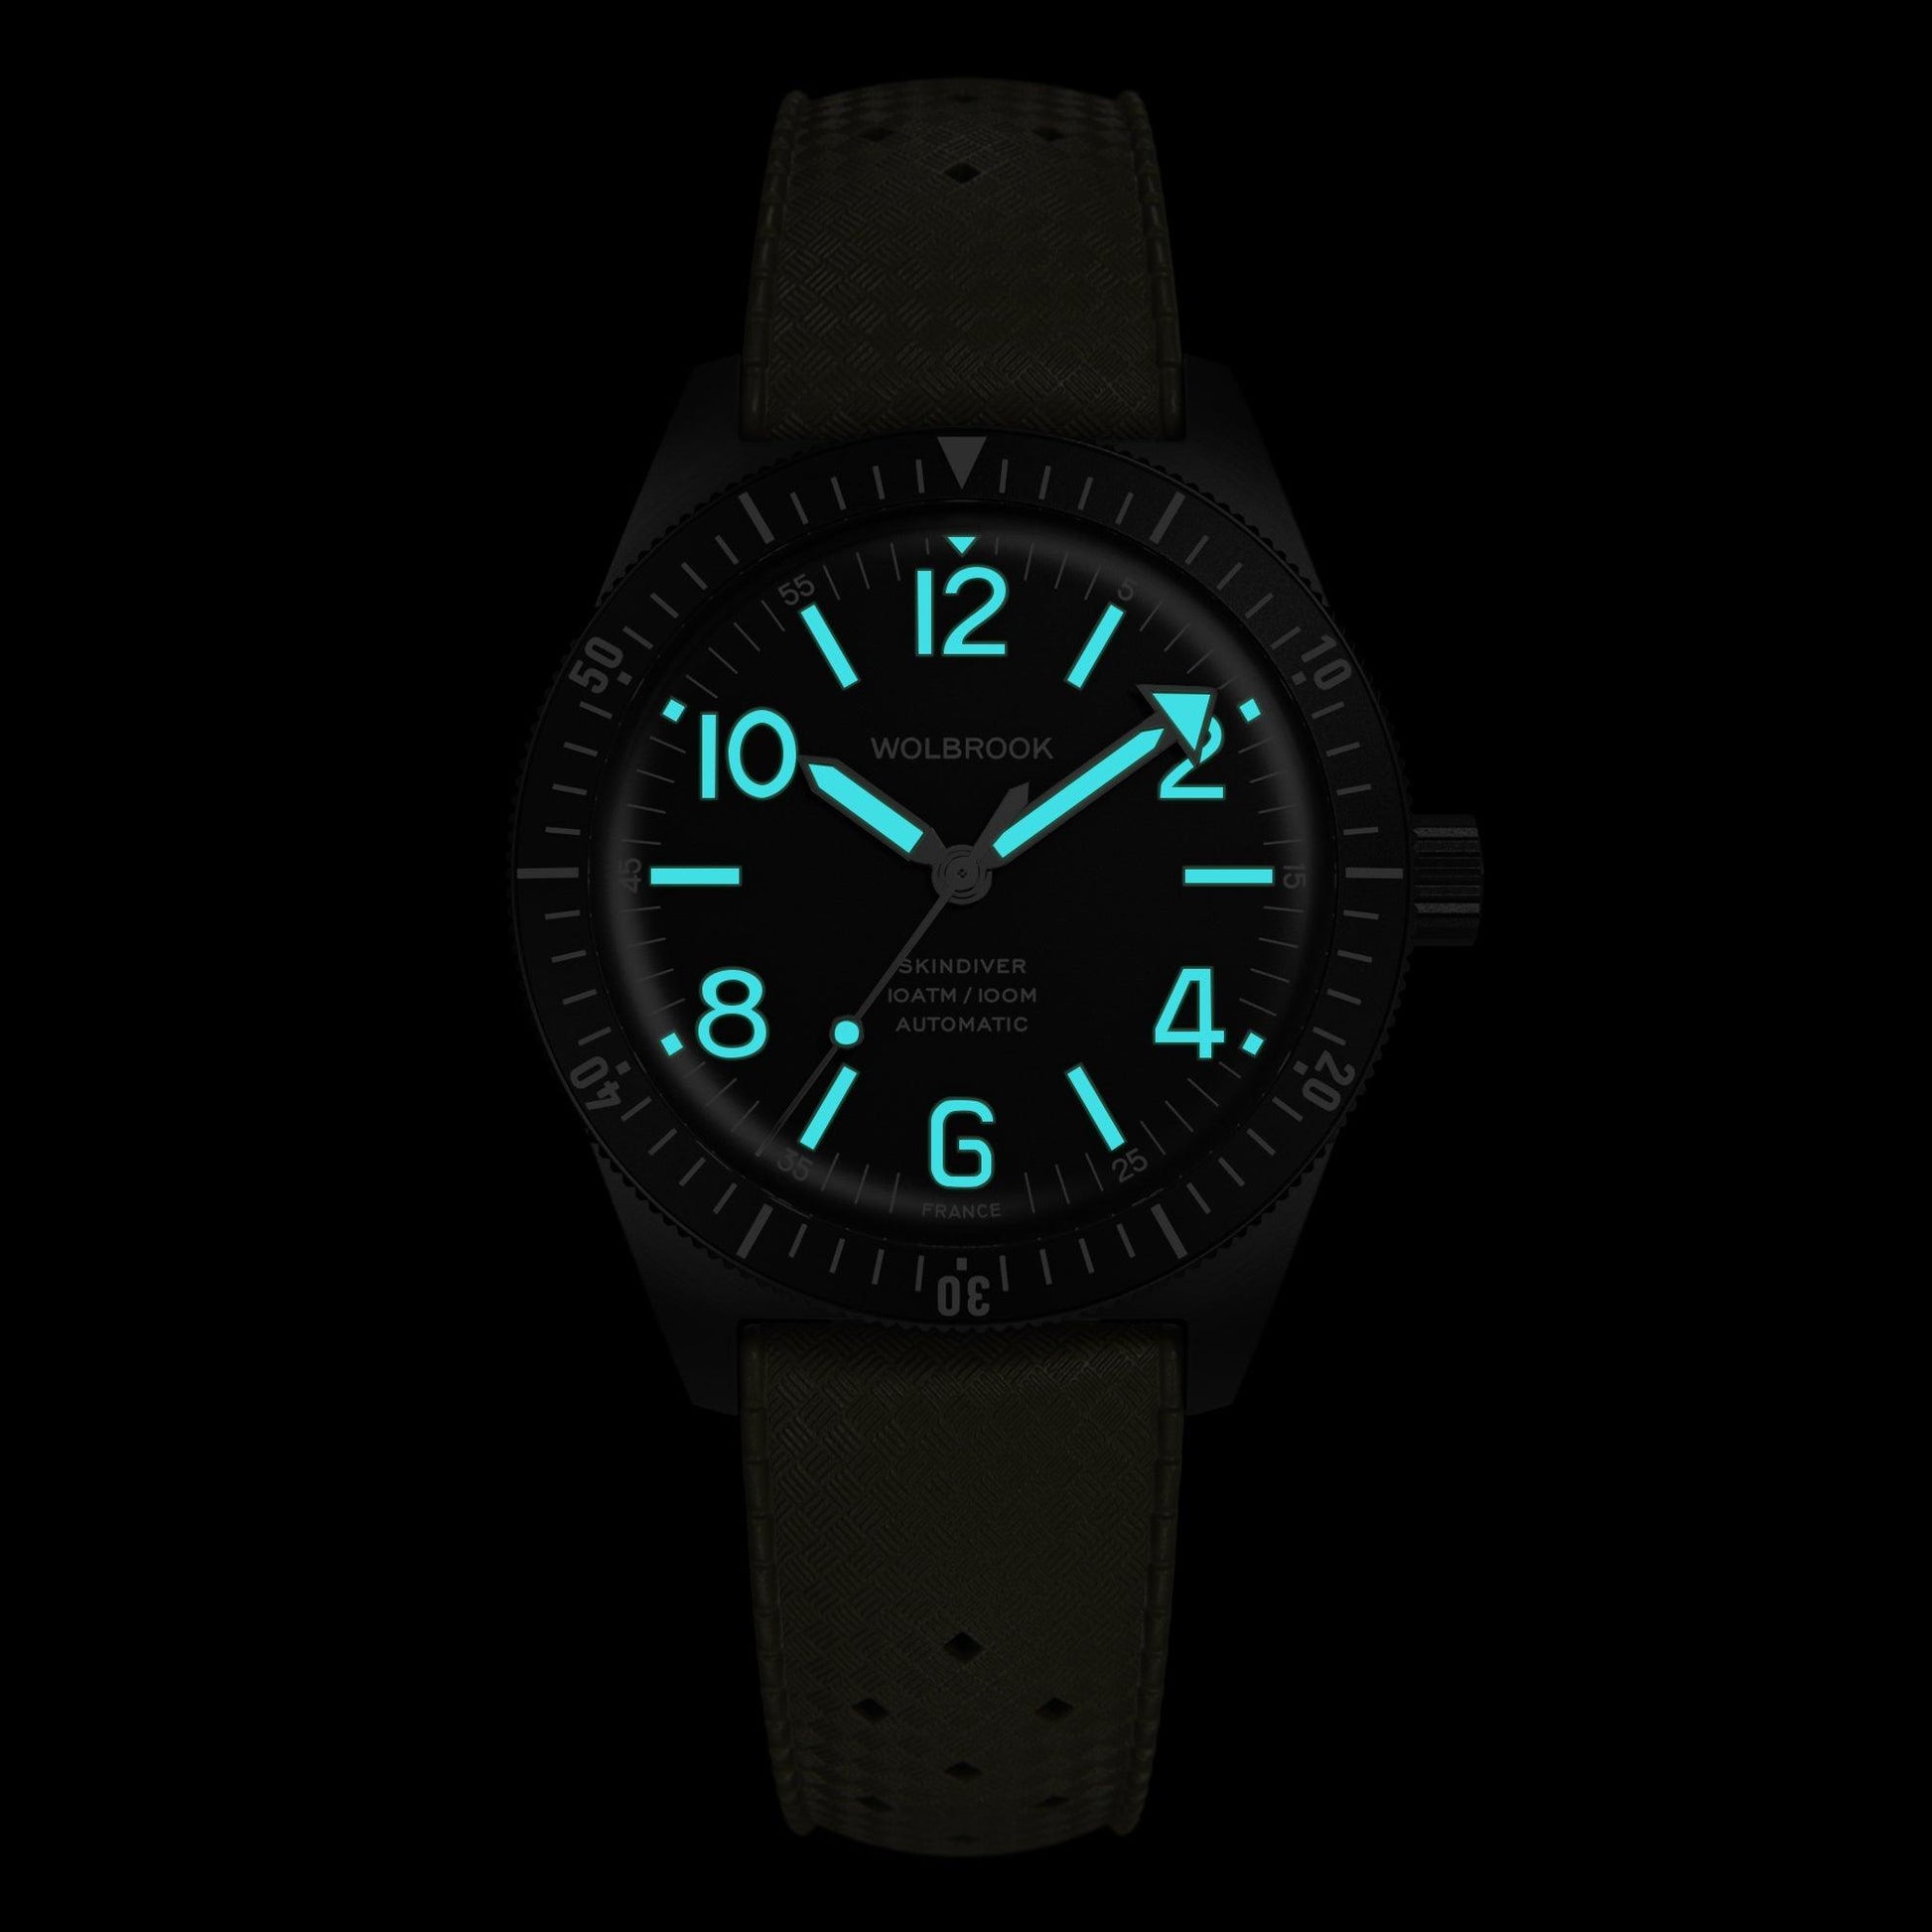 Skindiver Automatic Watch - Black PVD - 21 - Wolbrook Watches